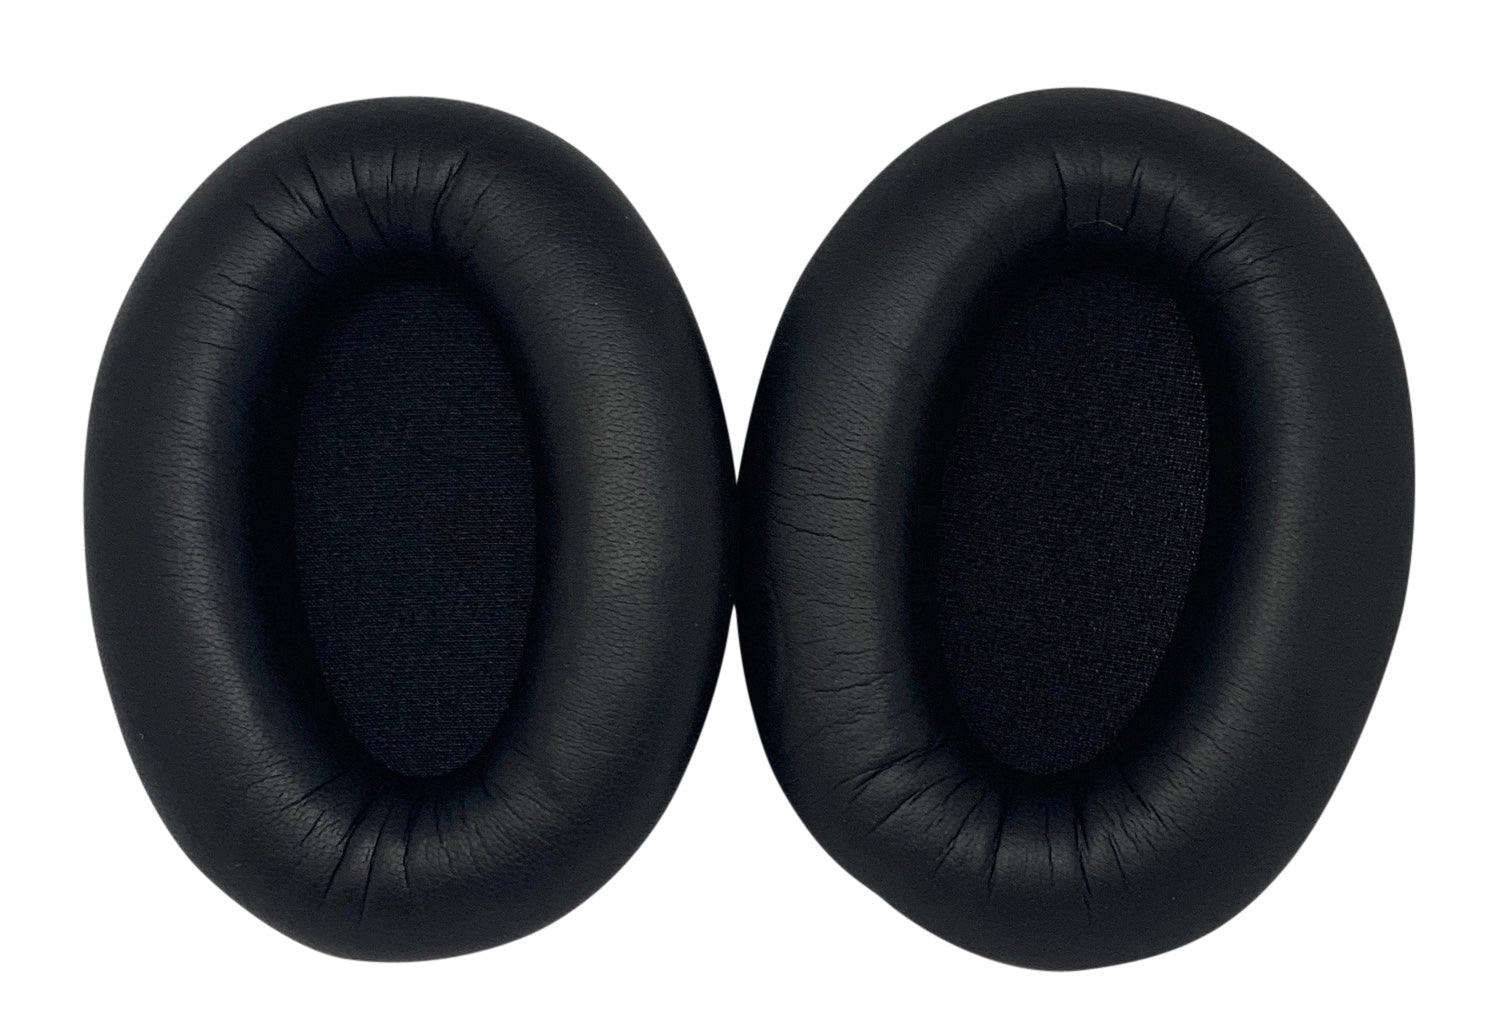 Pair Replacement Ear Pad Cushions Parts for Sony WH-1000XM3 Wireless Headphones - CentralSound